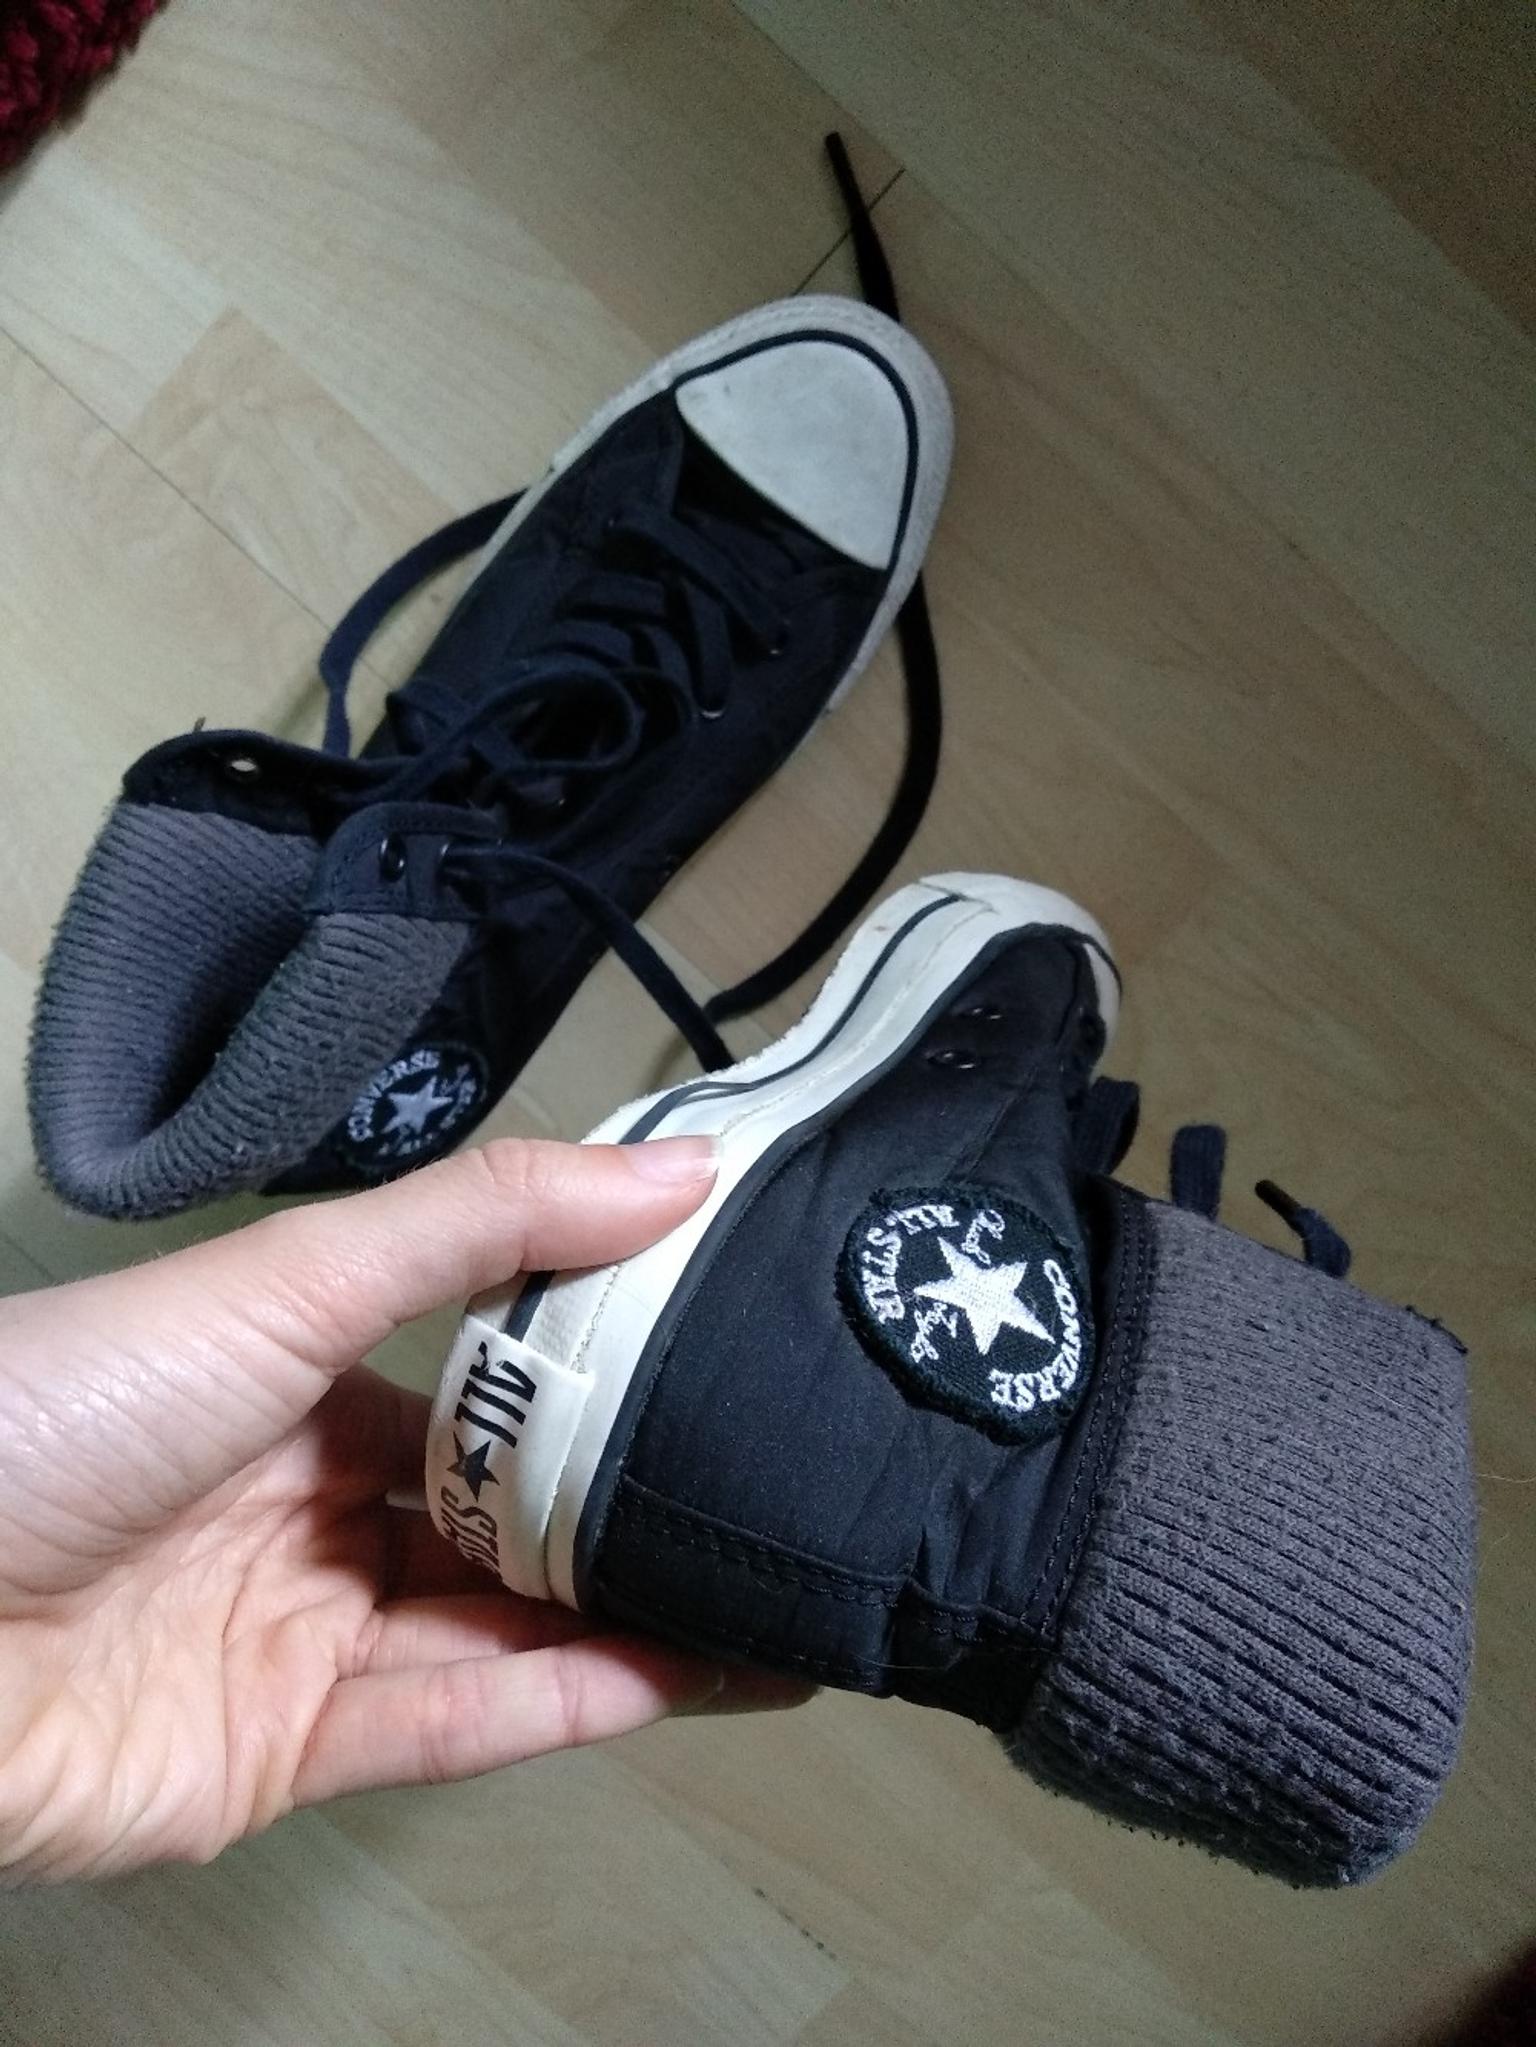 CONVERSE ALL STAR in 65123 Pescara for €25.00 for sale | Shpock